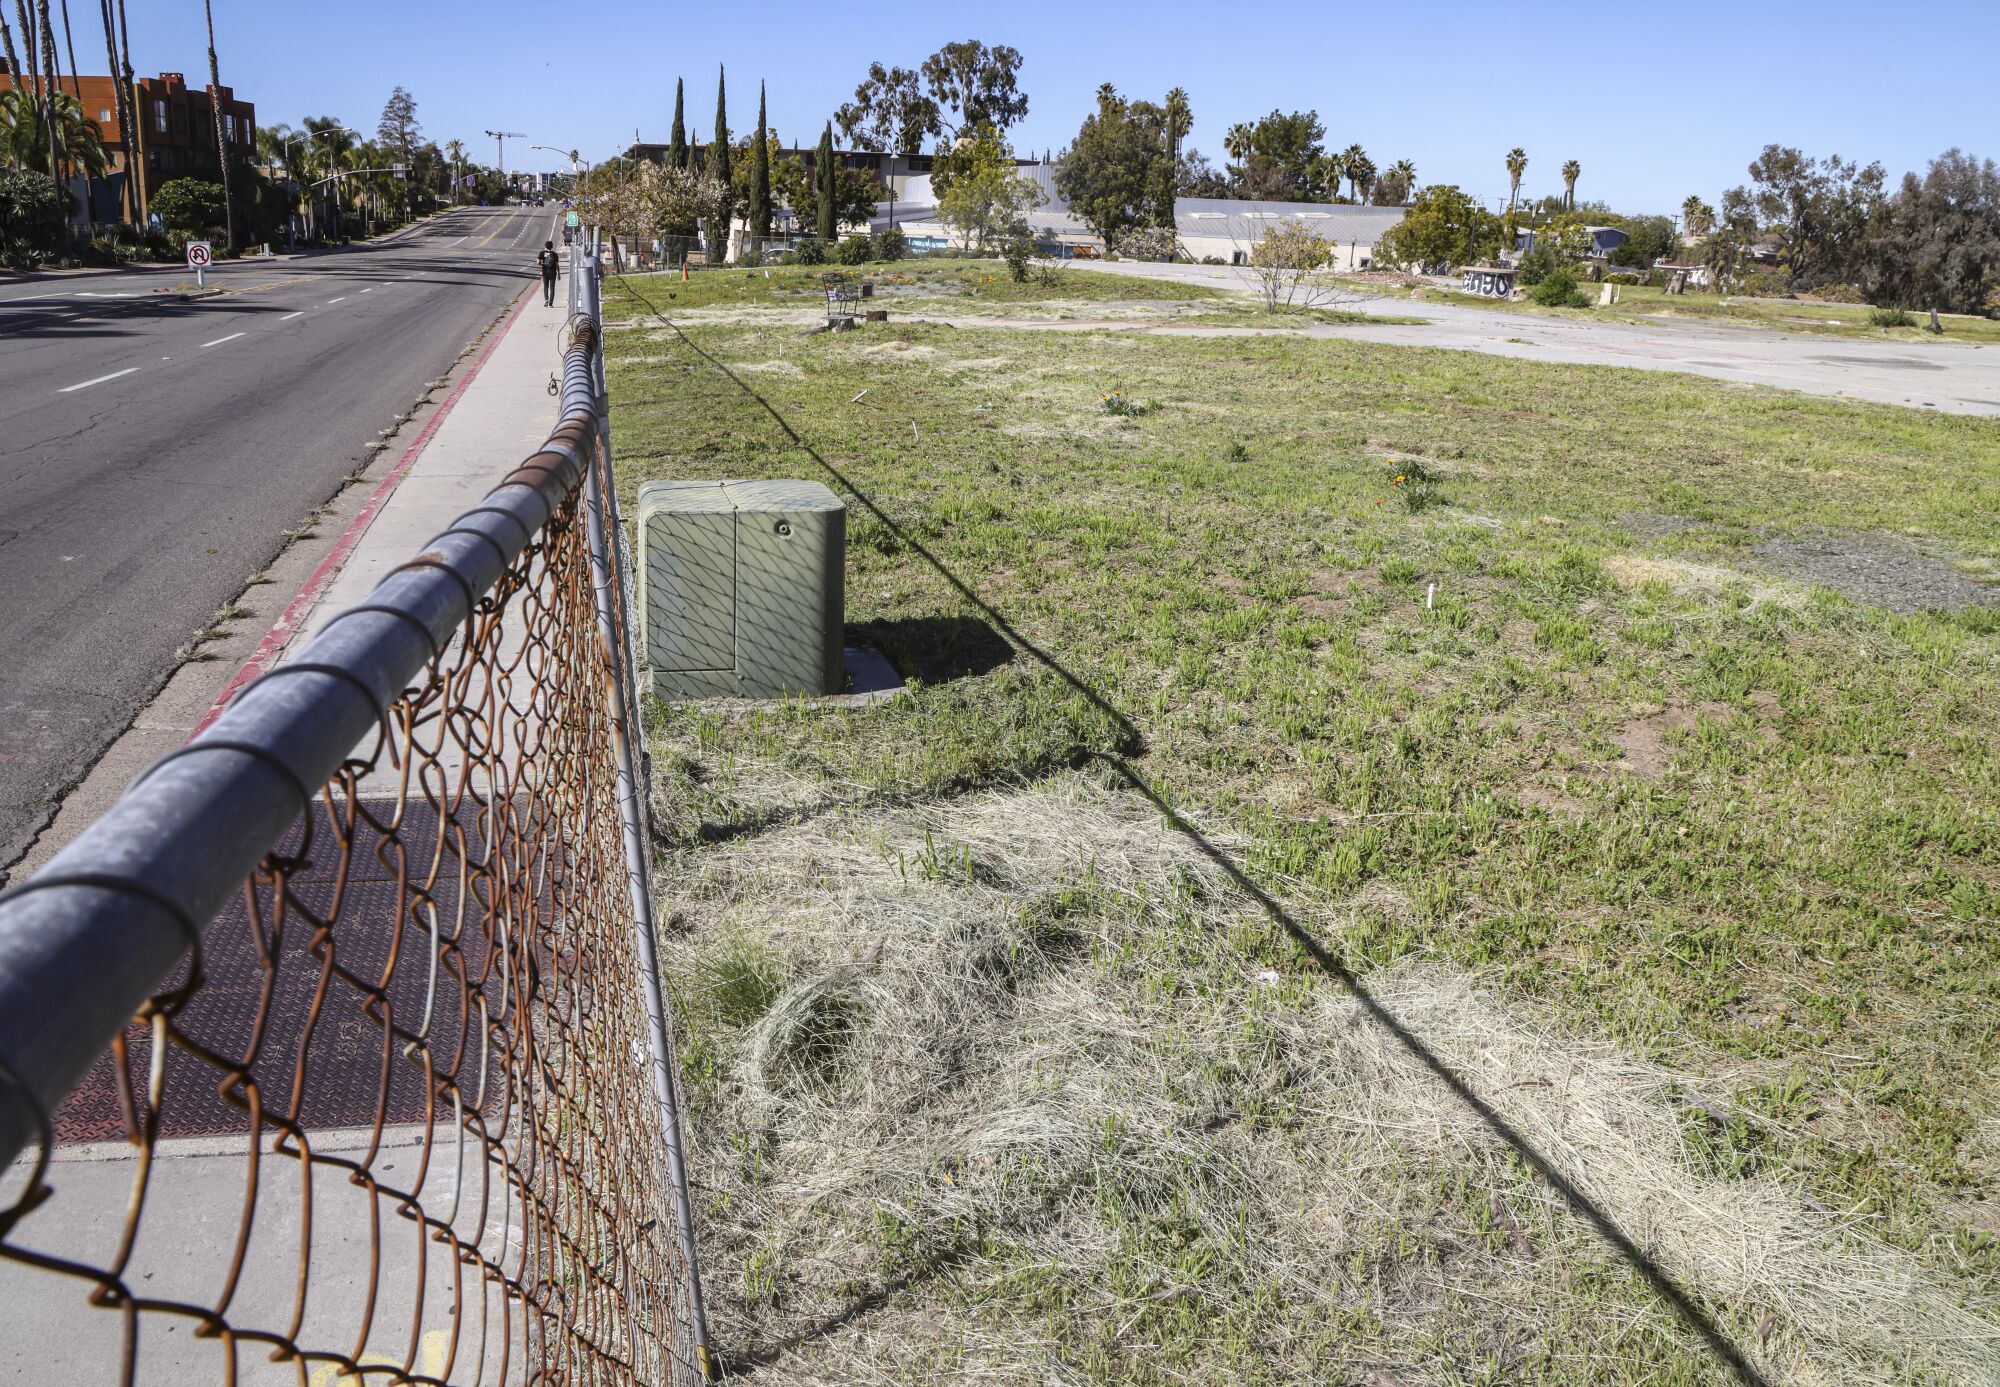 A vacant lot next to the College-Rolando Library, with a chain-link fence running its length next to the road.